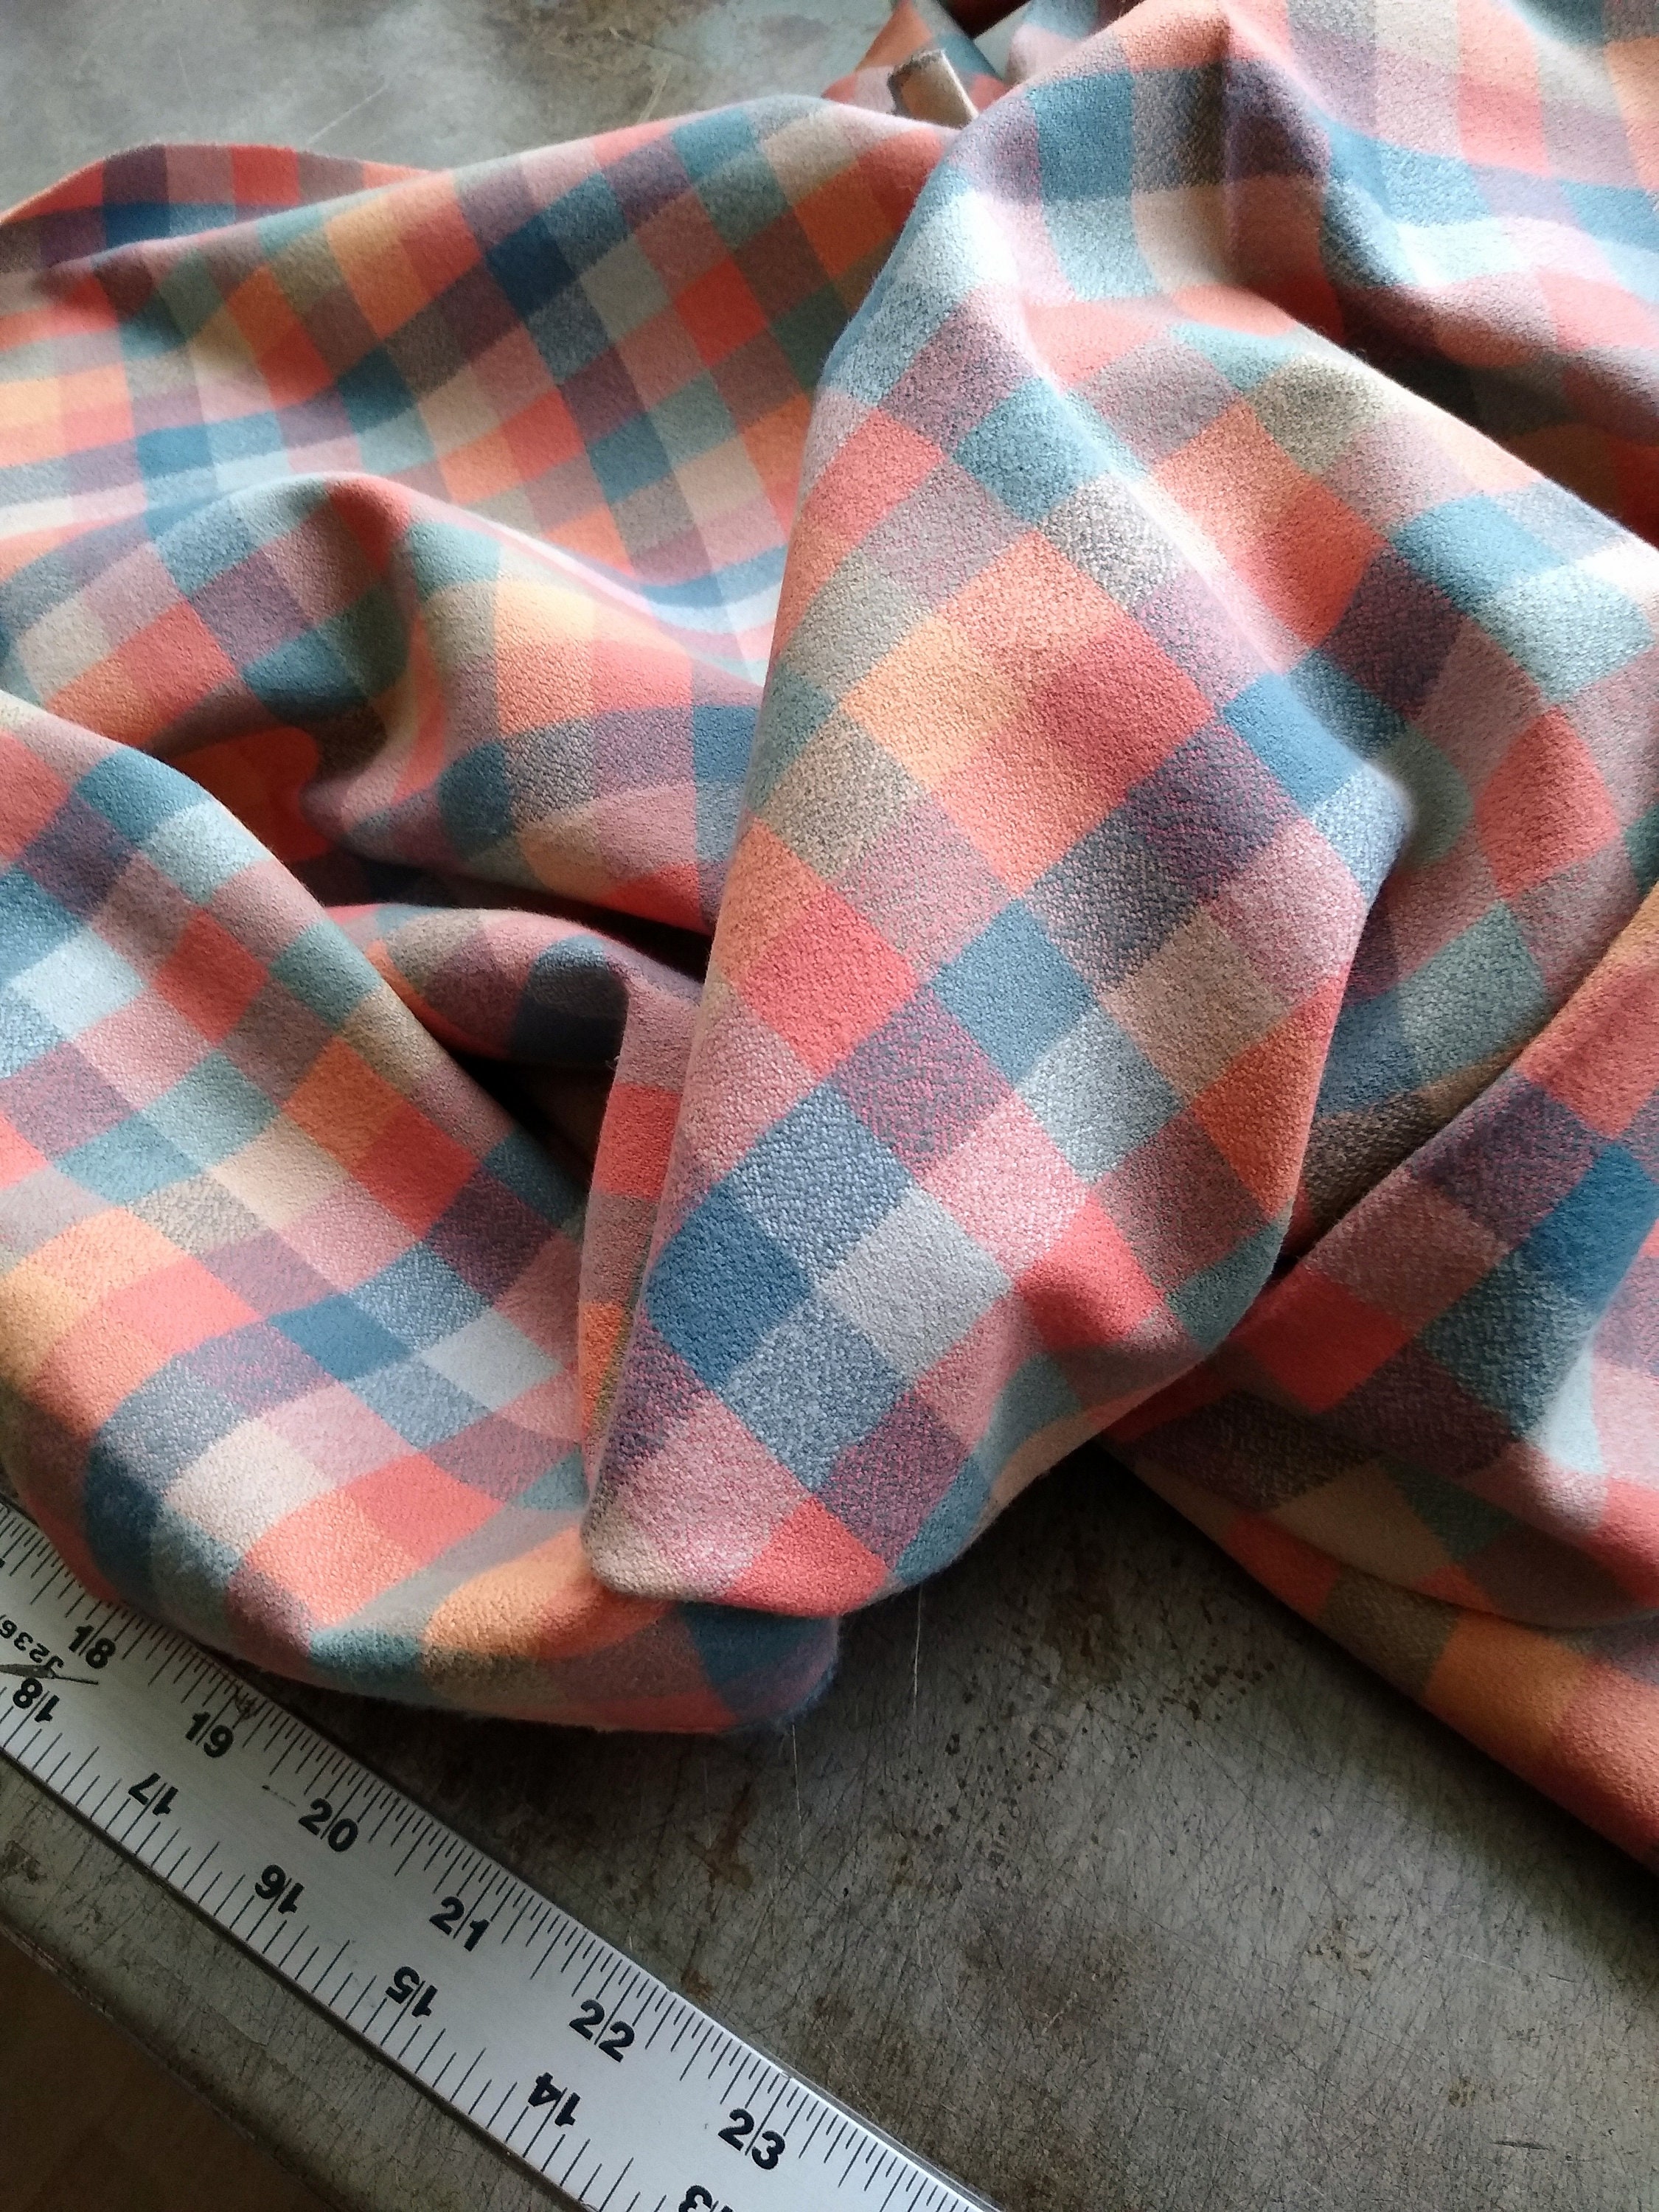 FabricLA 100% Cotton Flannel Fabric - 58/60 Inches (150 CM) Extra Wide  Fabric - Cotton Tartan Flannel Fabric - Use as Blanket, Pillowcases,  Quilting, Sewing, PJ, Shirt 